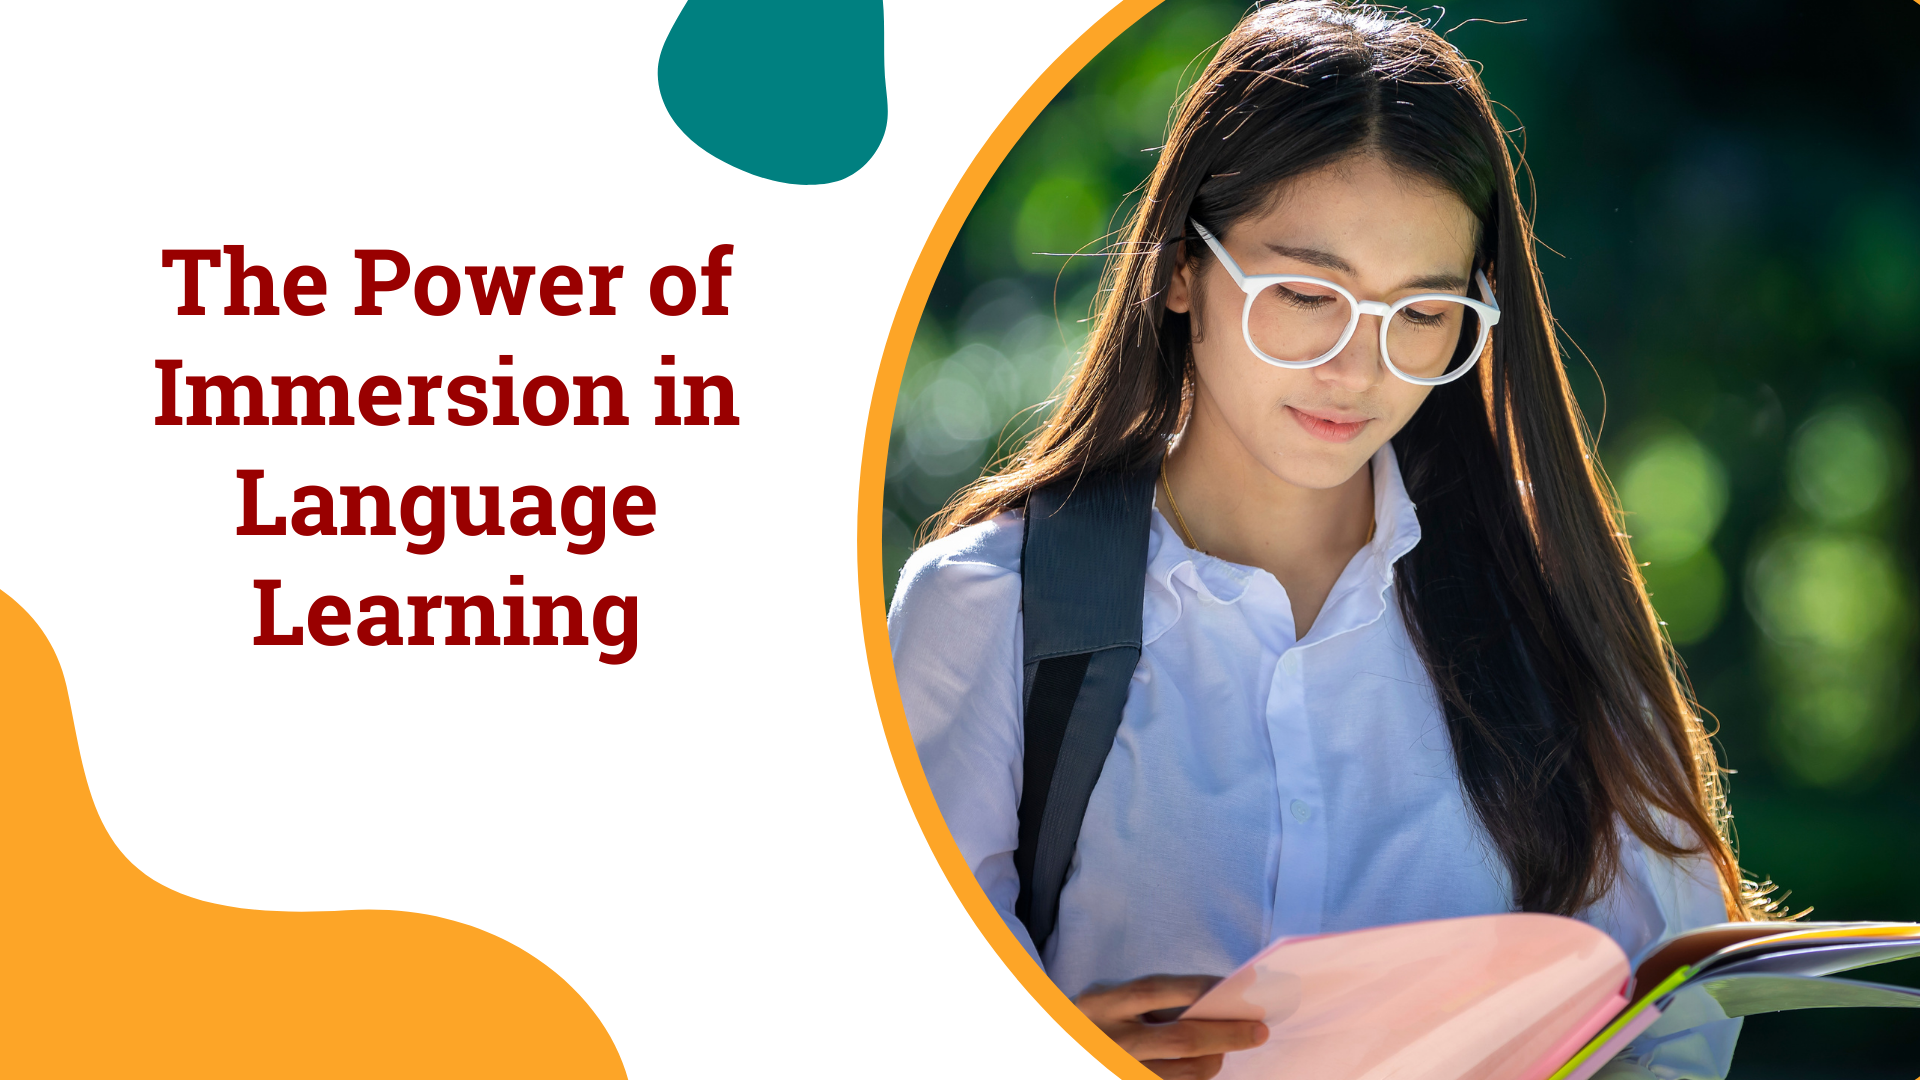 The Power of Immersion in Language Learning